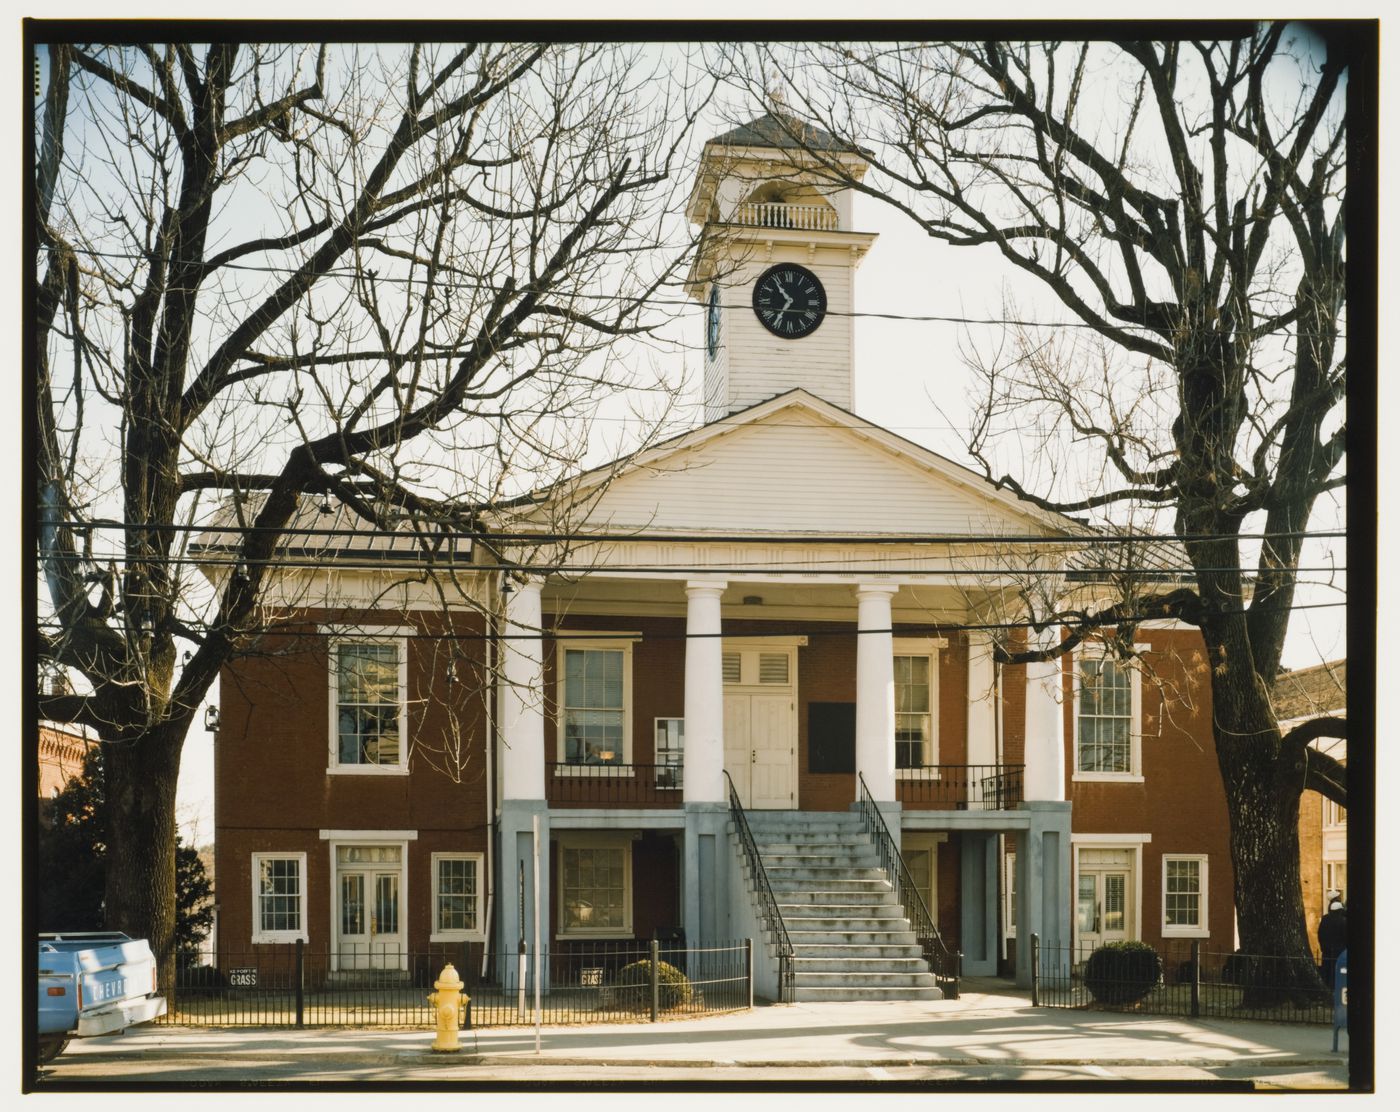 View of the Pittsylvania County Courthouse, Chatham, Virginia